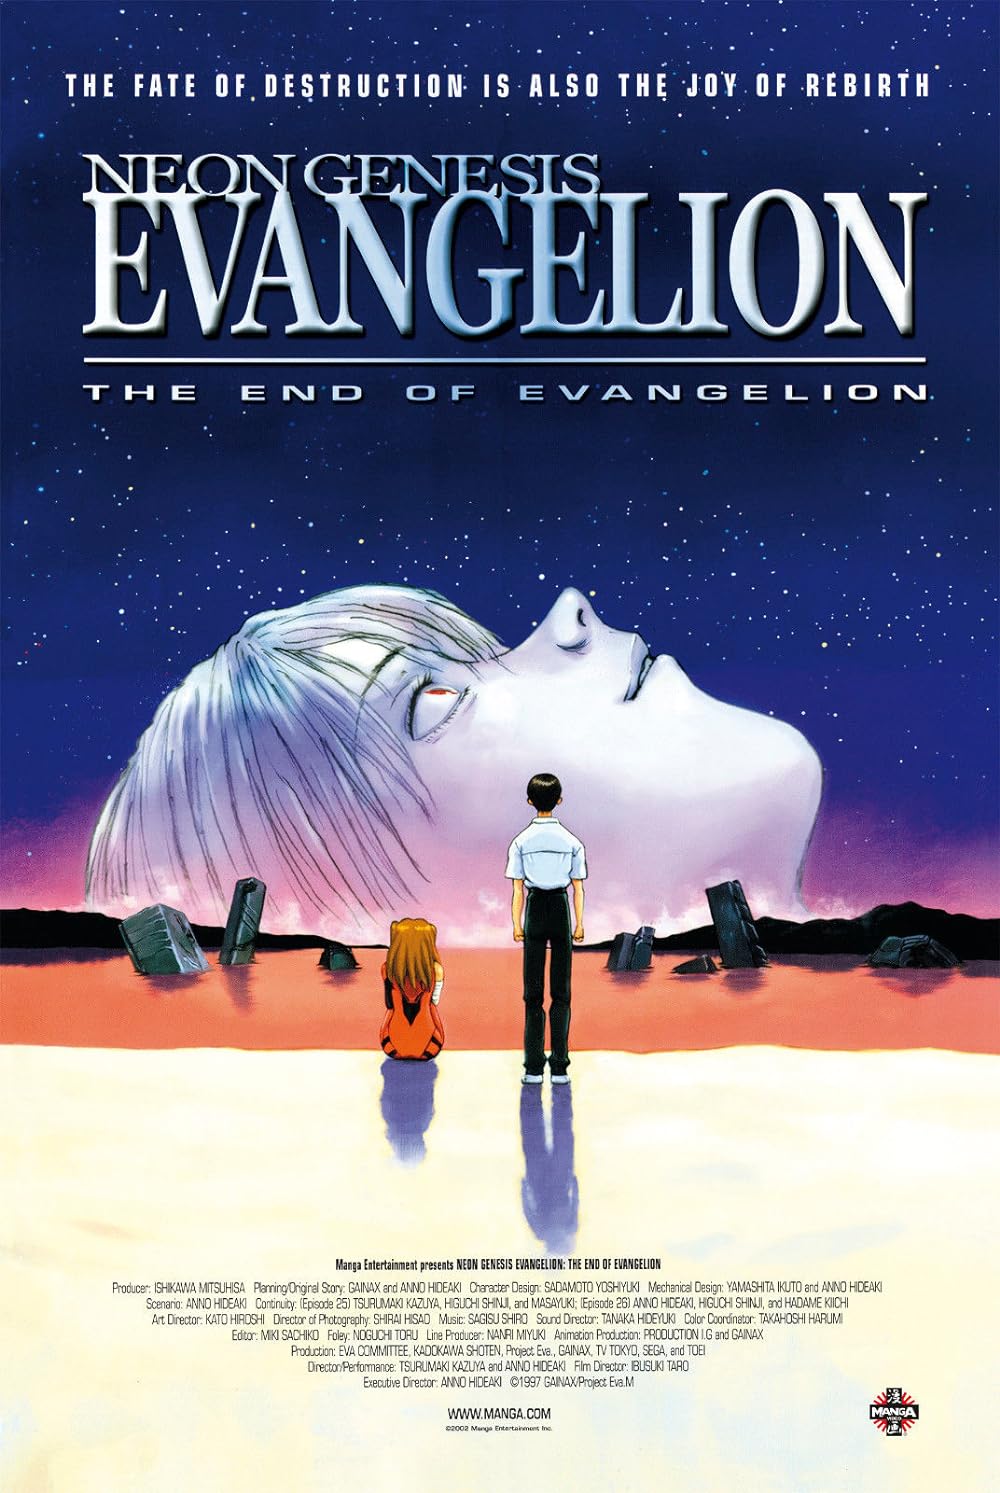 End of Evangelion cover